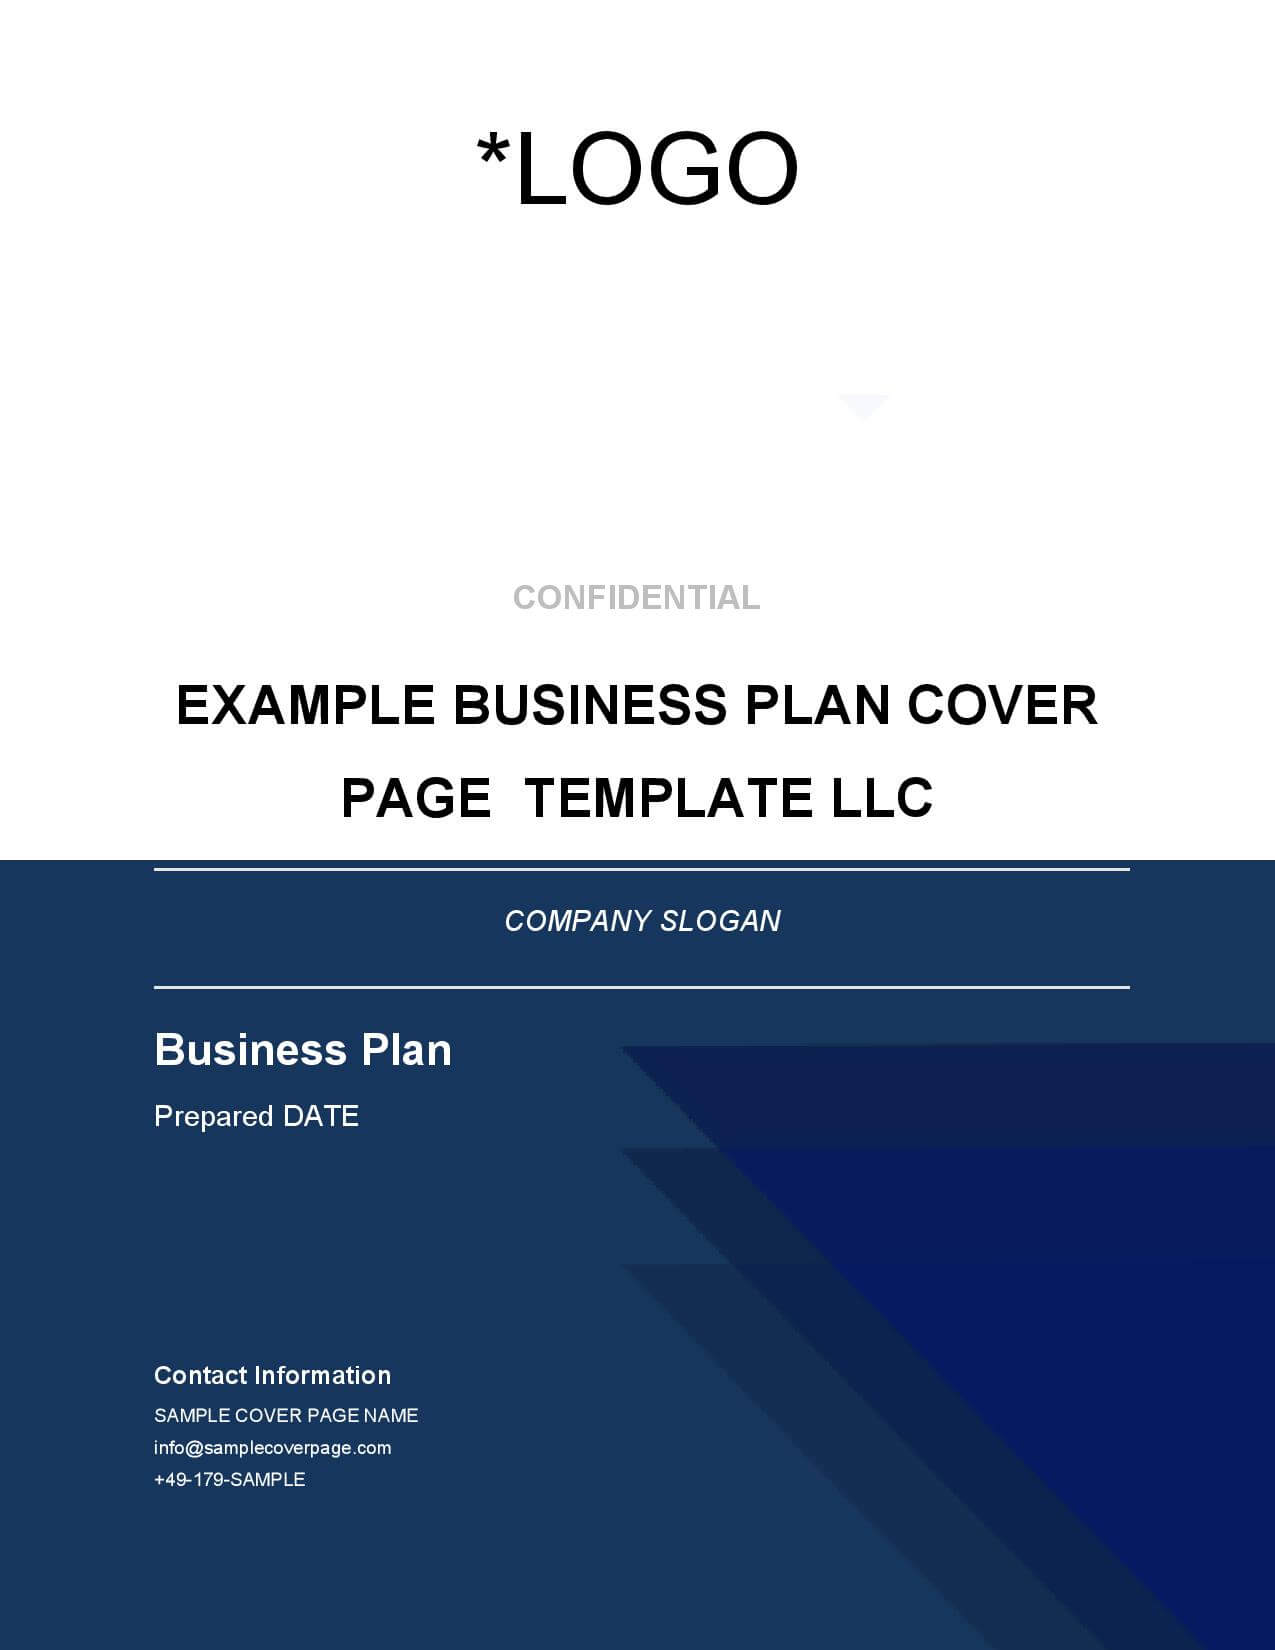 Business Plan Cover Page Template BrainHive Business Planning